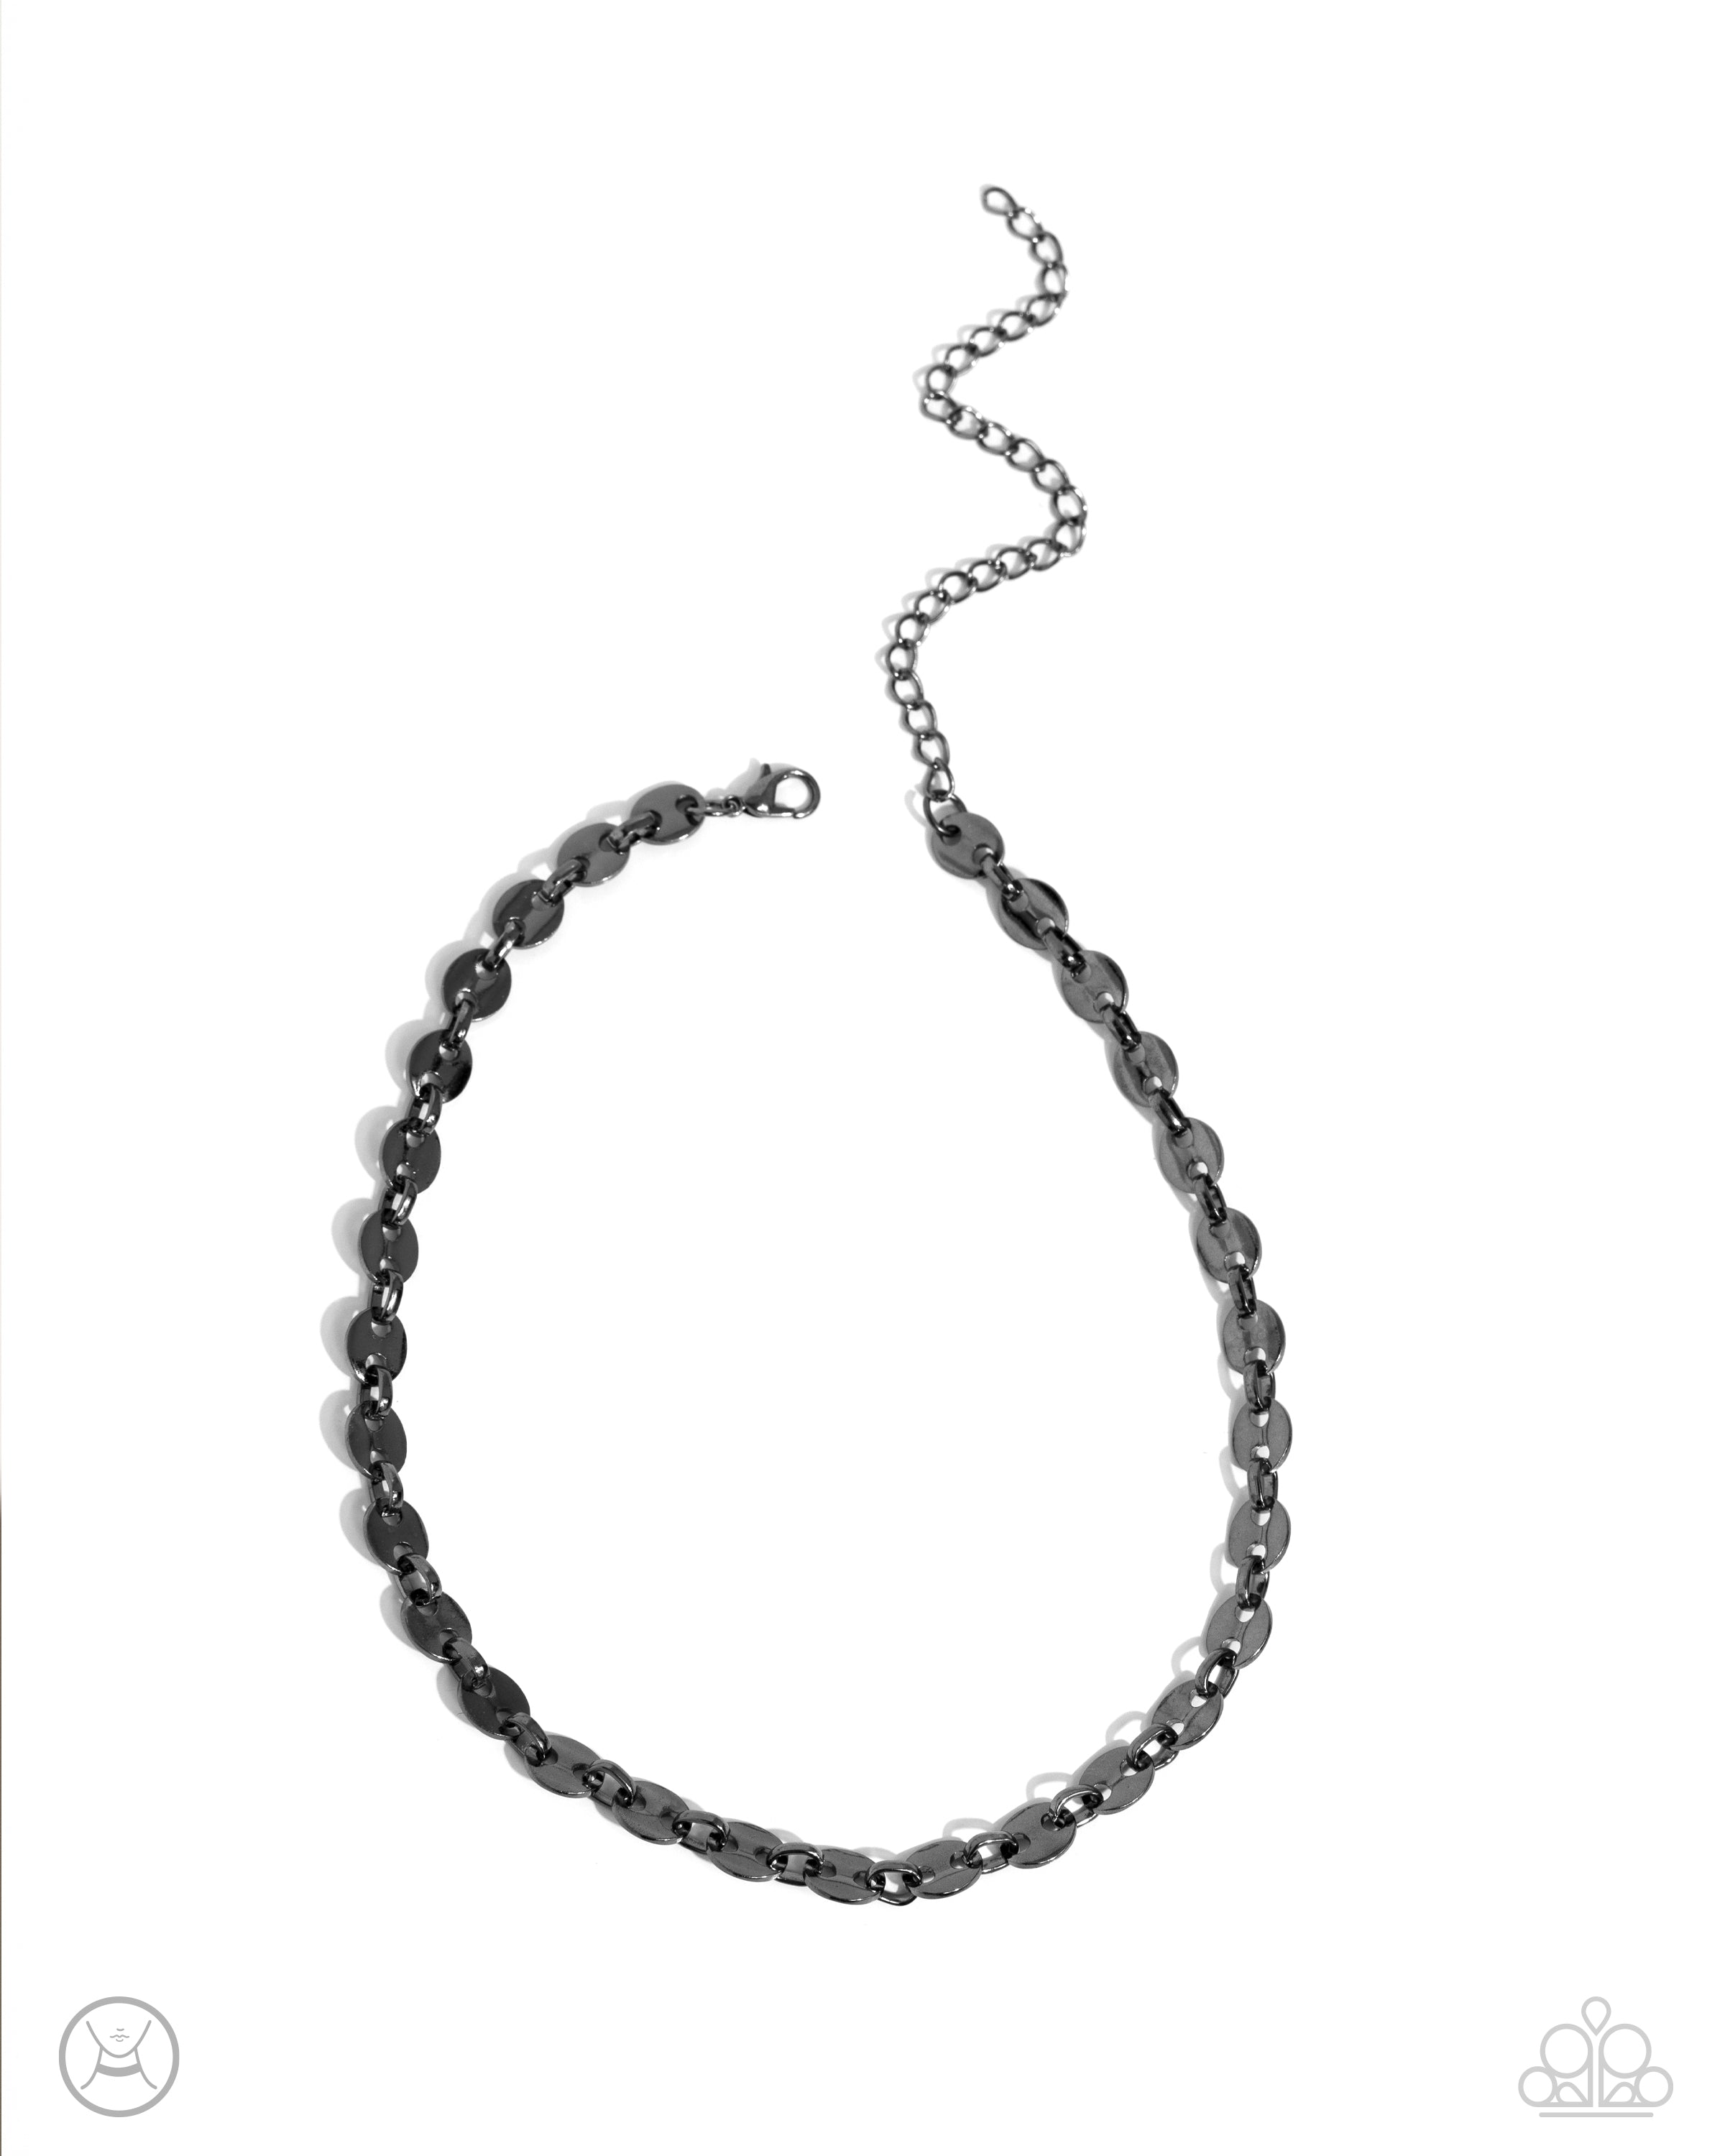 ABSTRACT ADVOCATE BLACK-NECKLACE